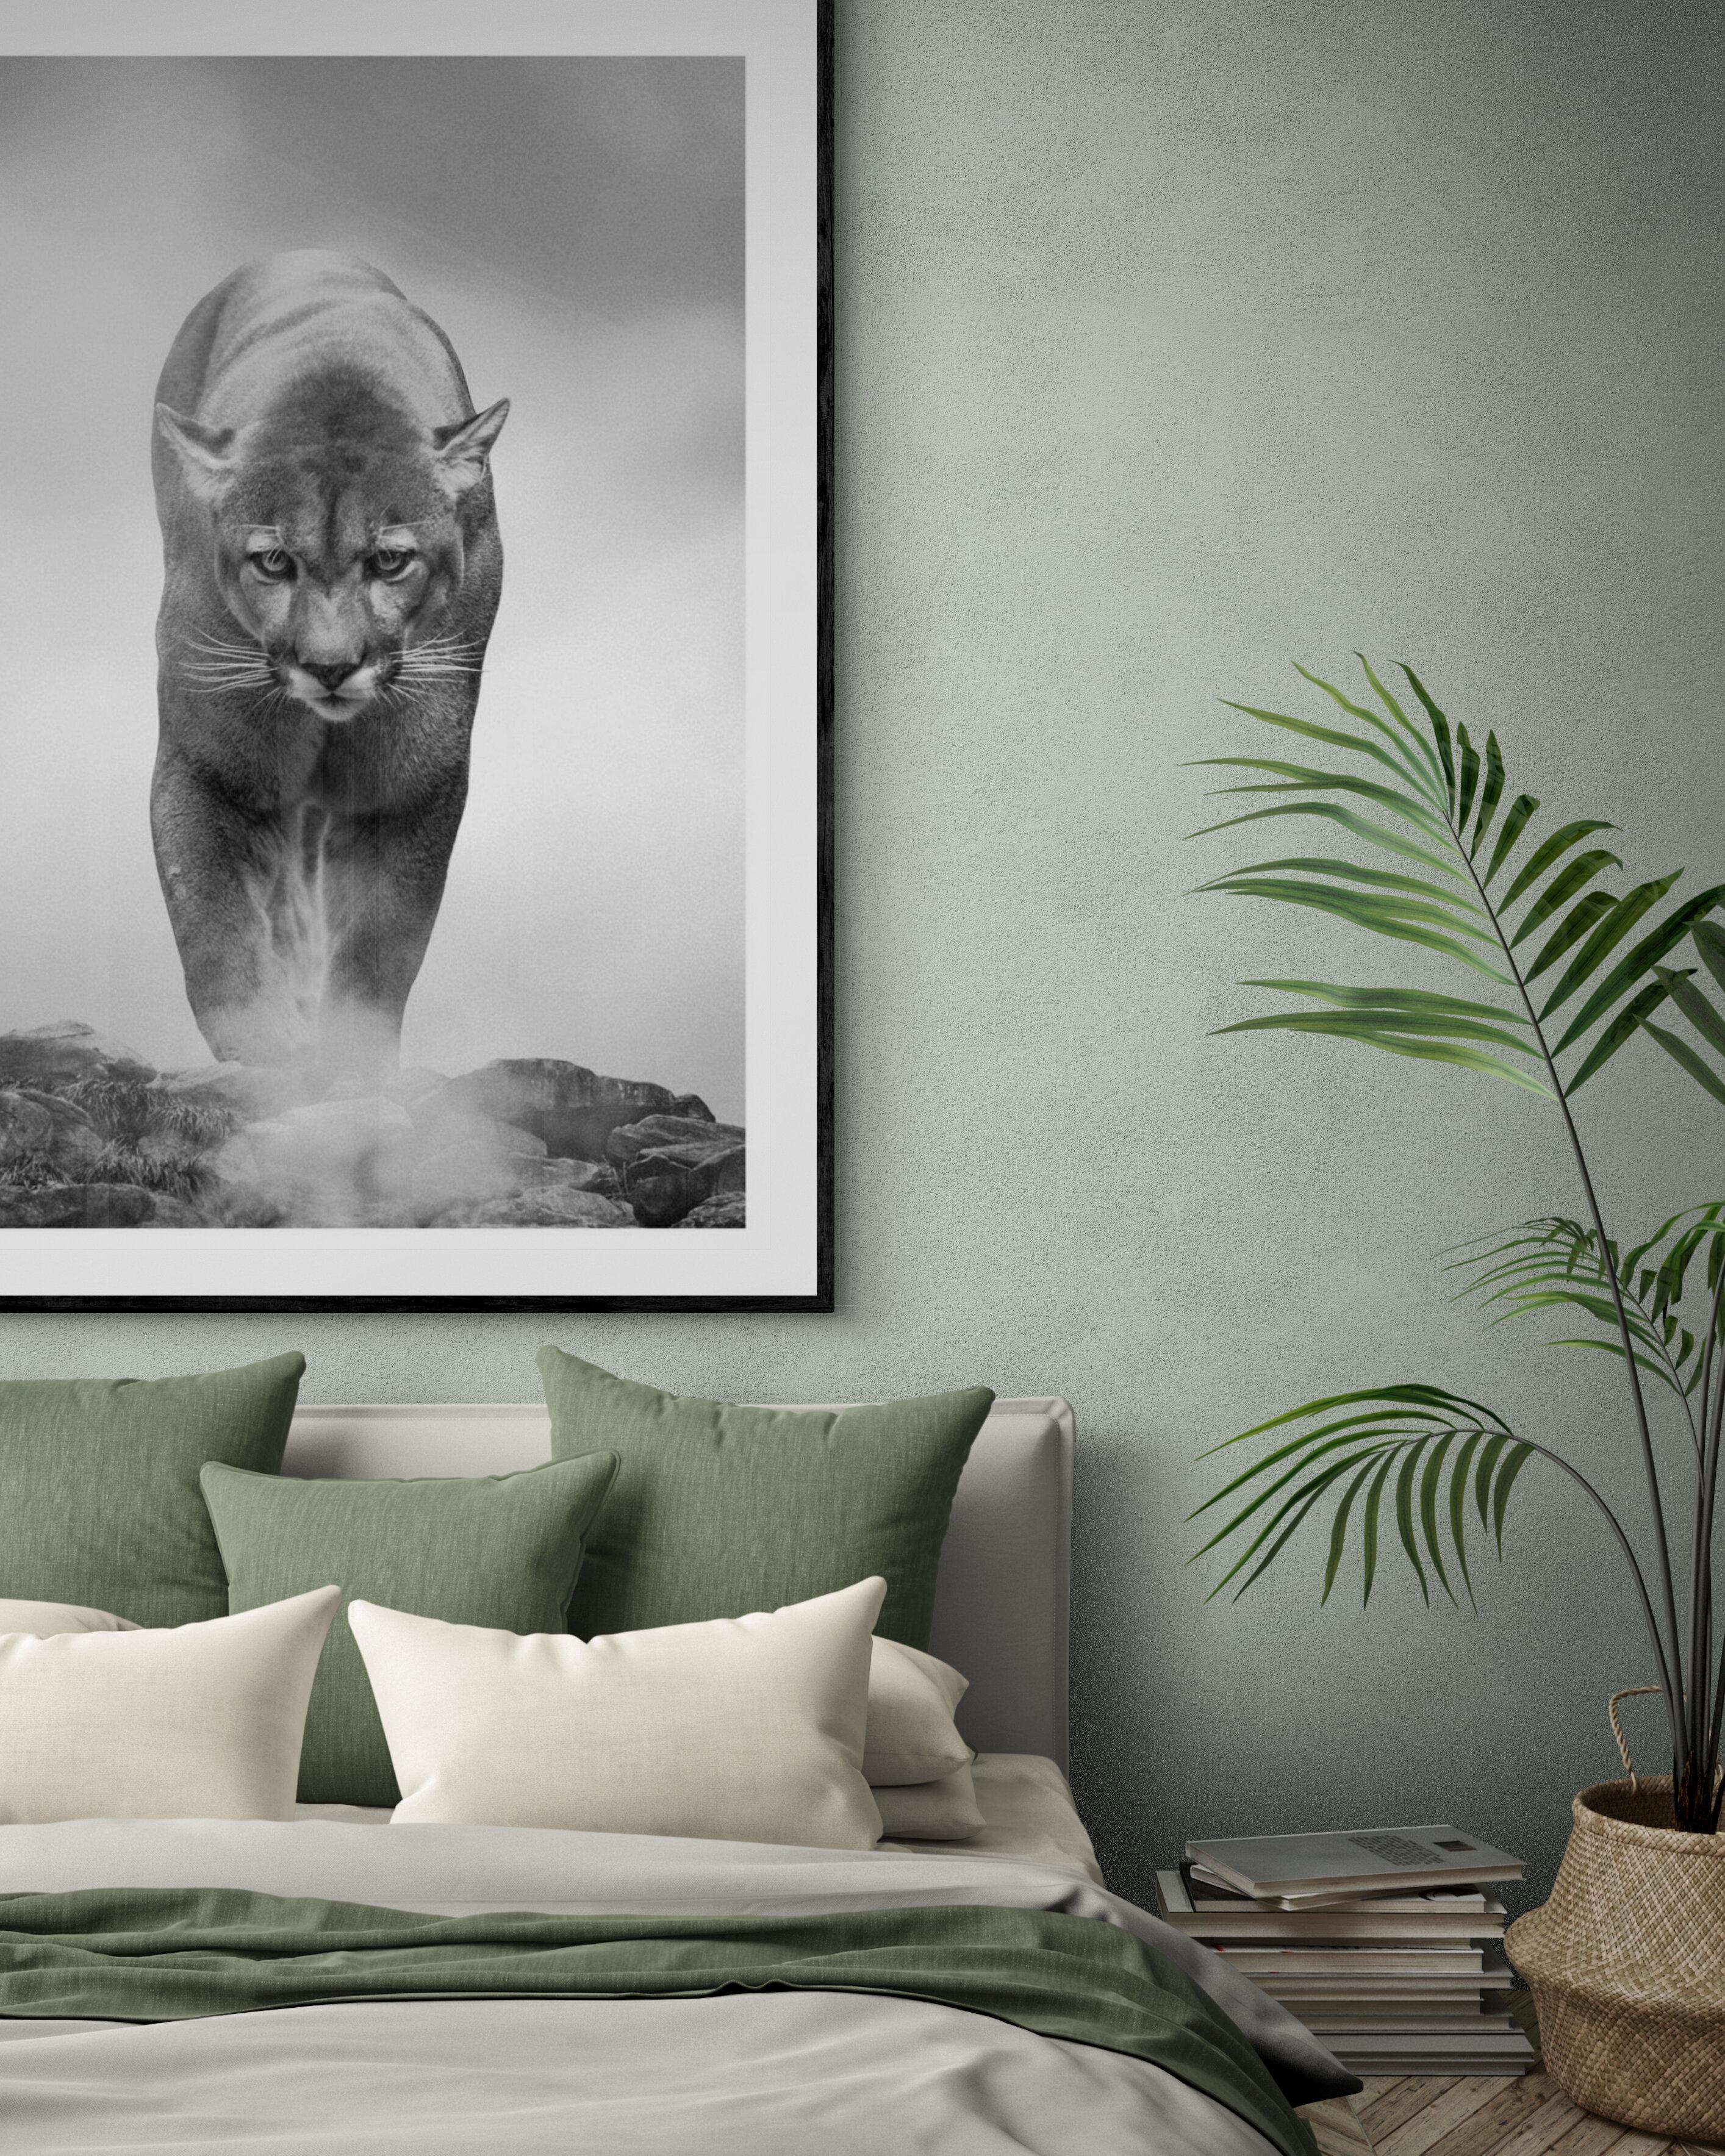  36x48 Black and White Photography, Cougar Photograph, Mountain Lion Art For Sale 3